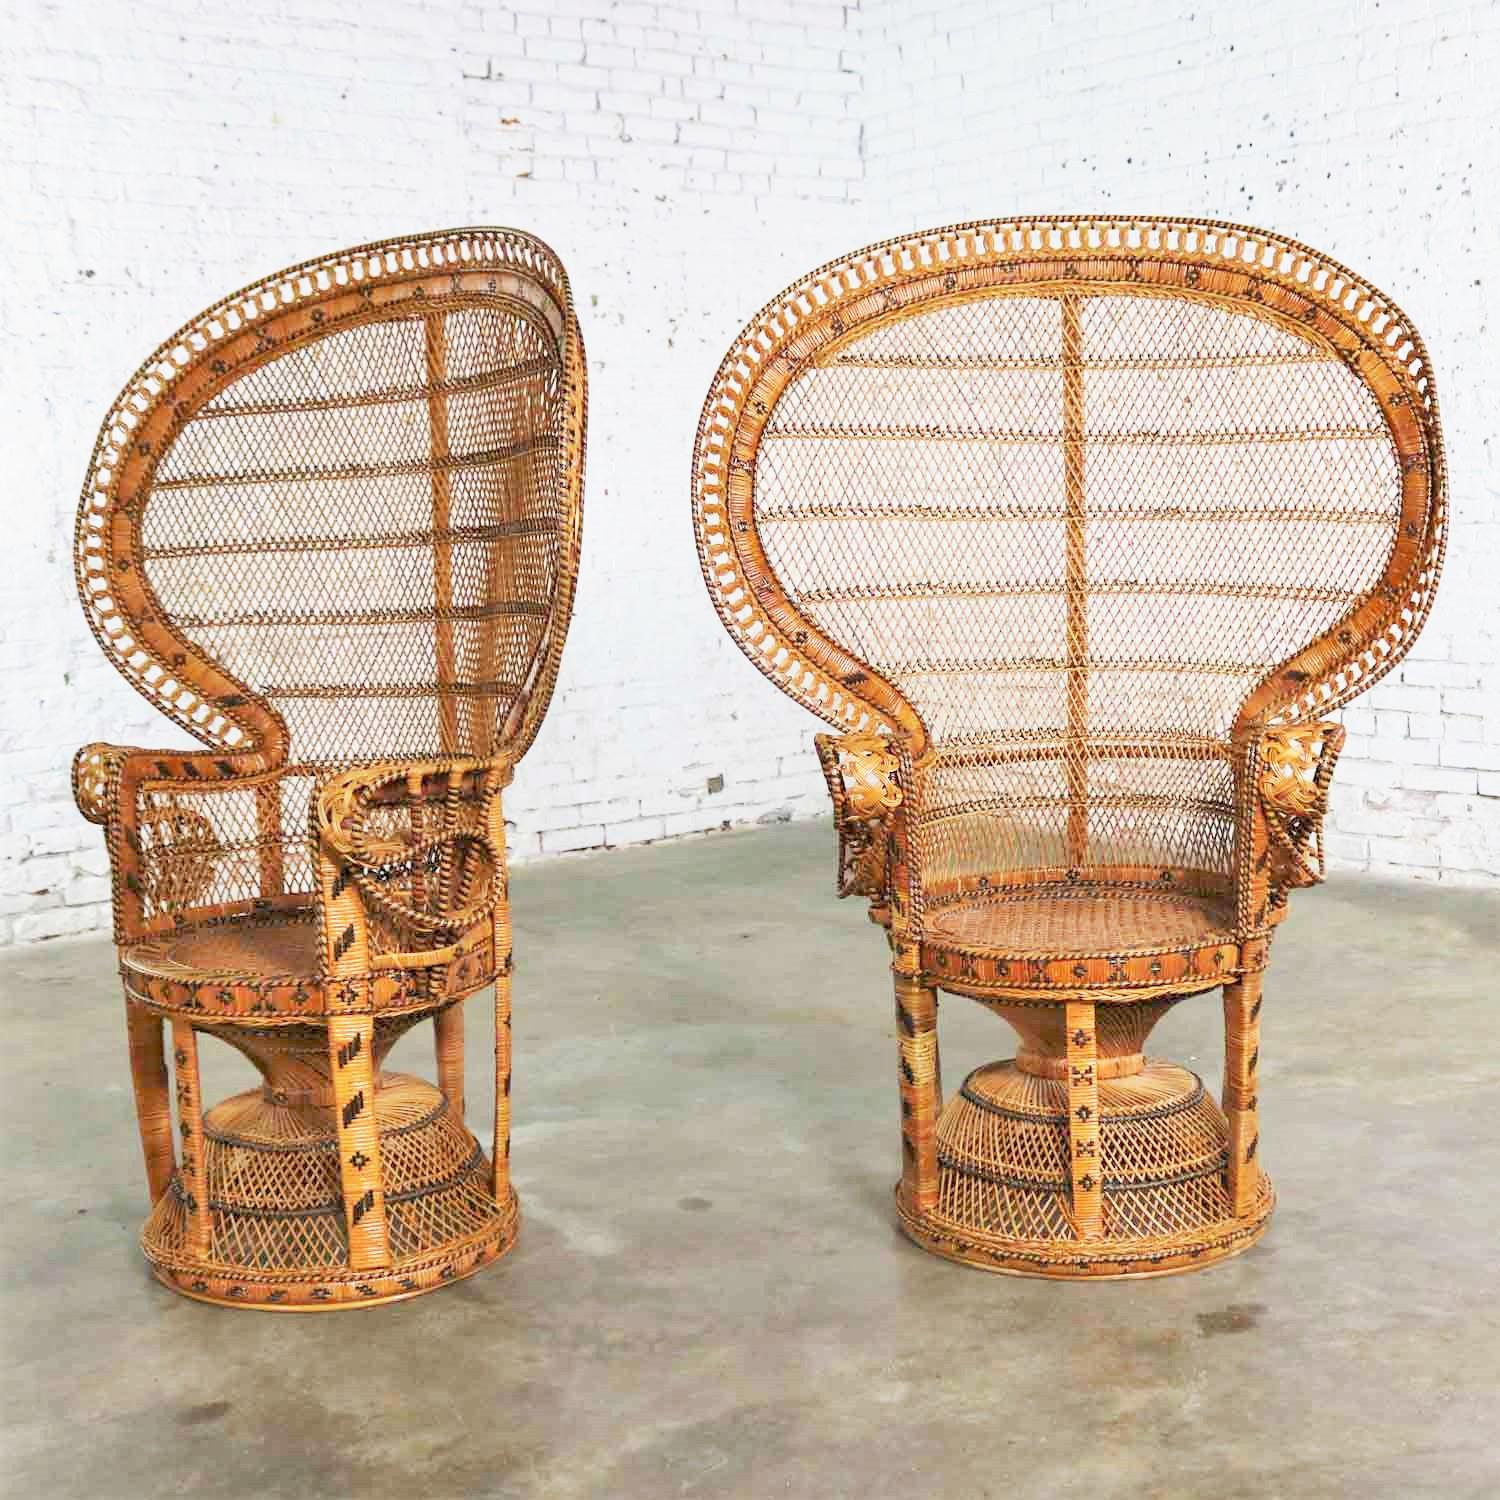 Awesome pair of vintage Bohemian or Hollywood Regency wicker rattan peacock fan back chairs. Both chairs are in wonderful vintage condition. One chair had lost some of its rattan wrap on one of its legs, but we have replaced it beautifully. We have